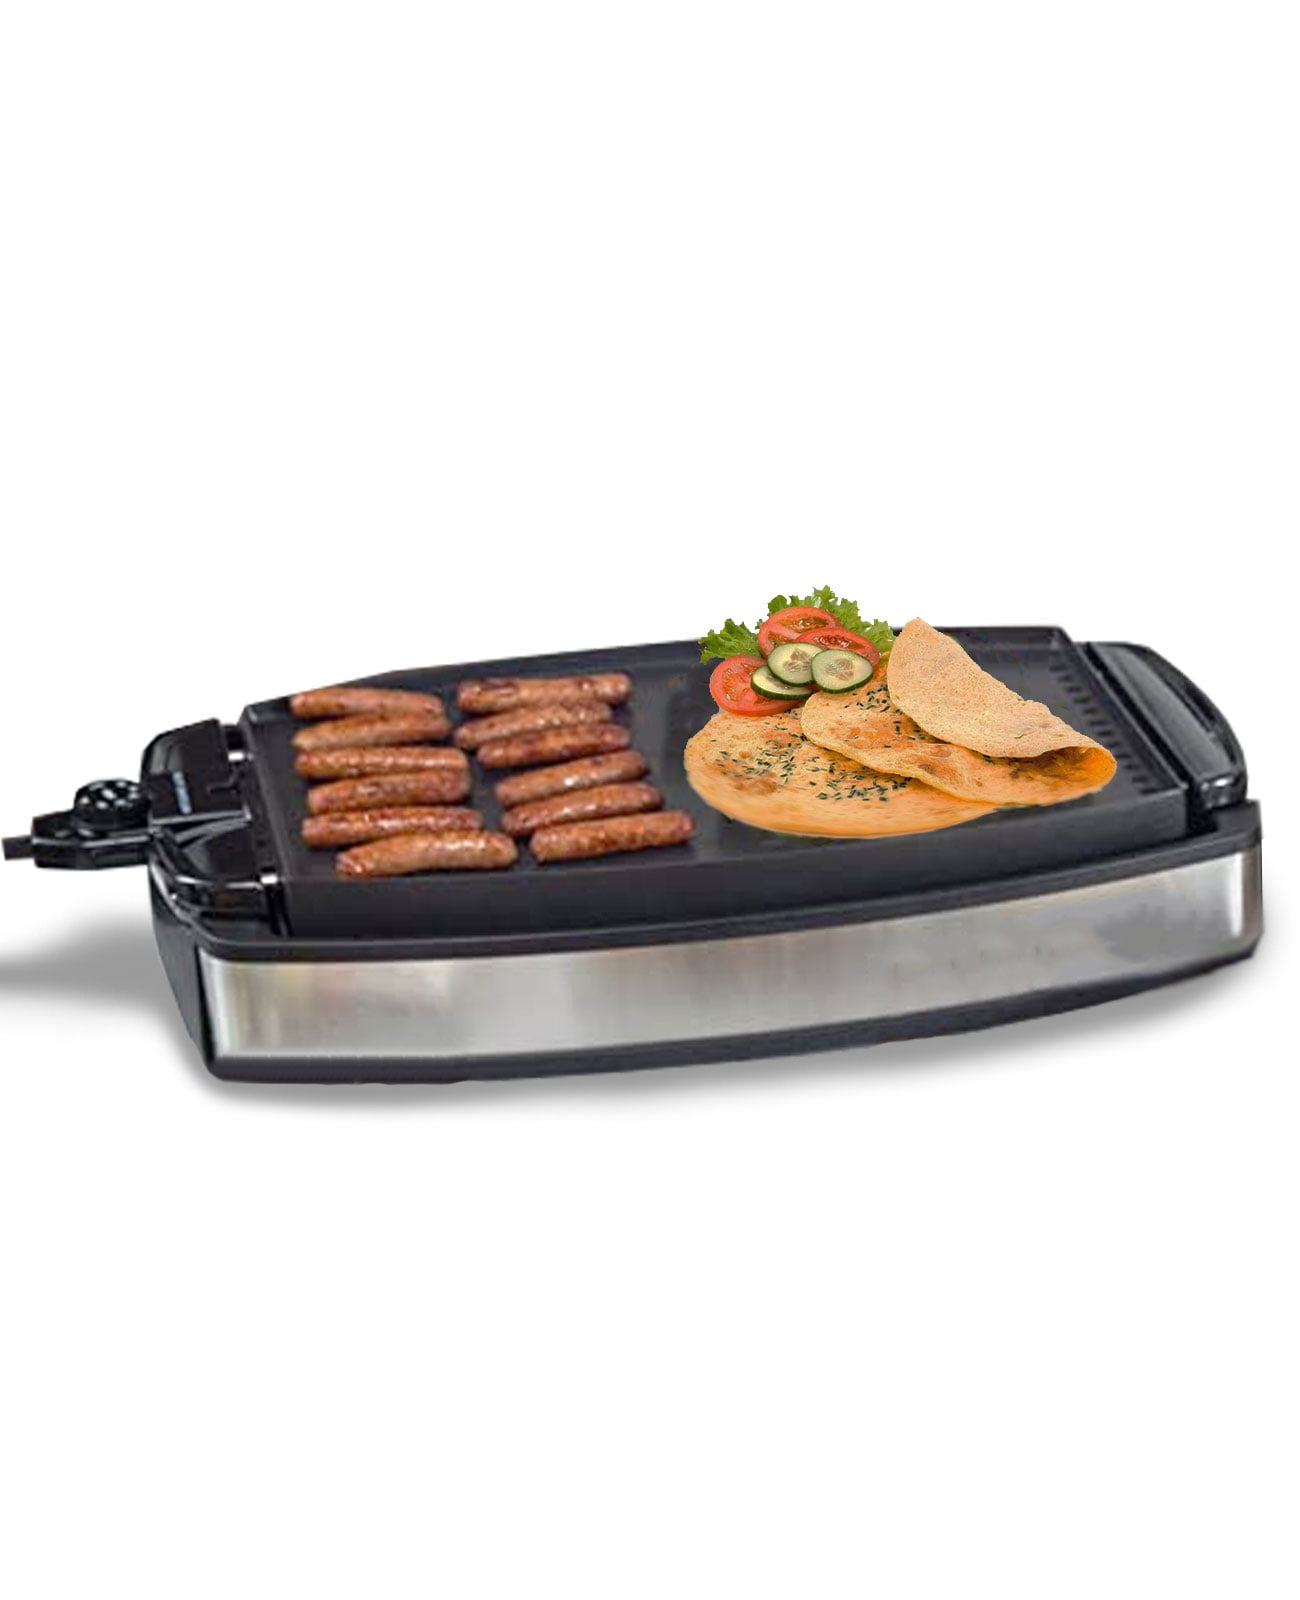 3-in-1 Electric Indoor Grill + Griddle, 8-Serving, Reversible Nonstick  Plates, 2 Cooking Zones with Adjustable Temperature (38546), Black 